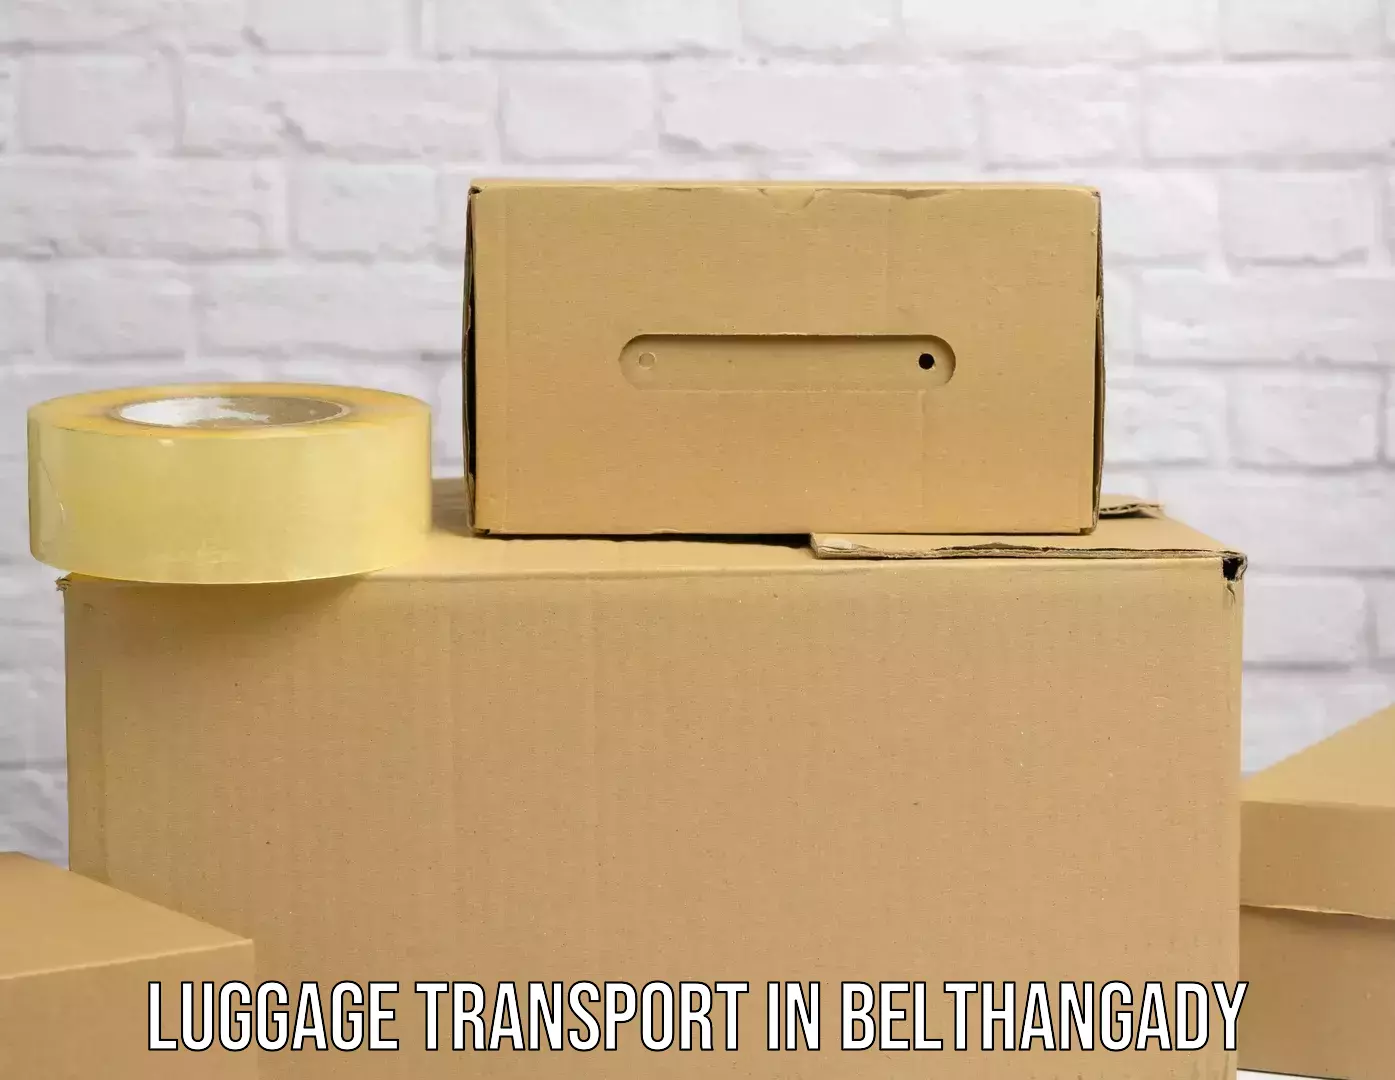 Luggage transport consultancy in Belthangady